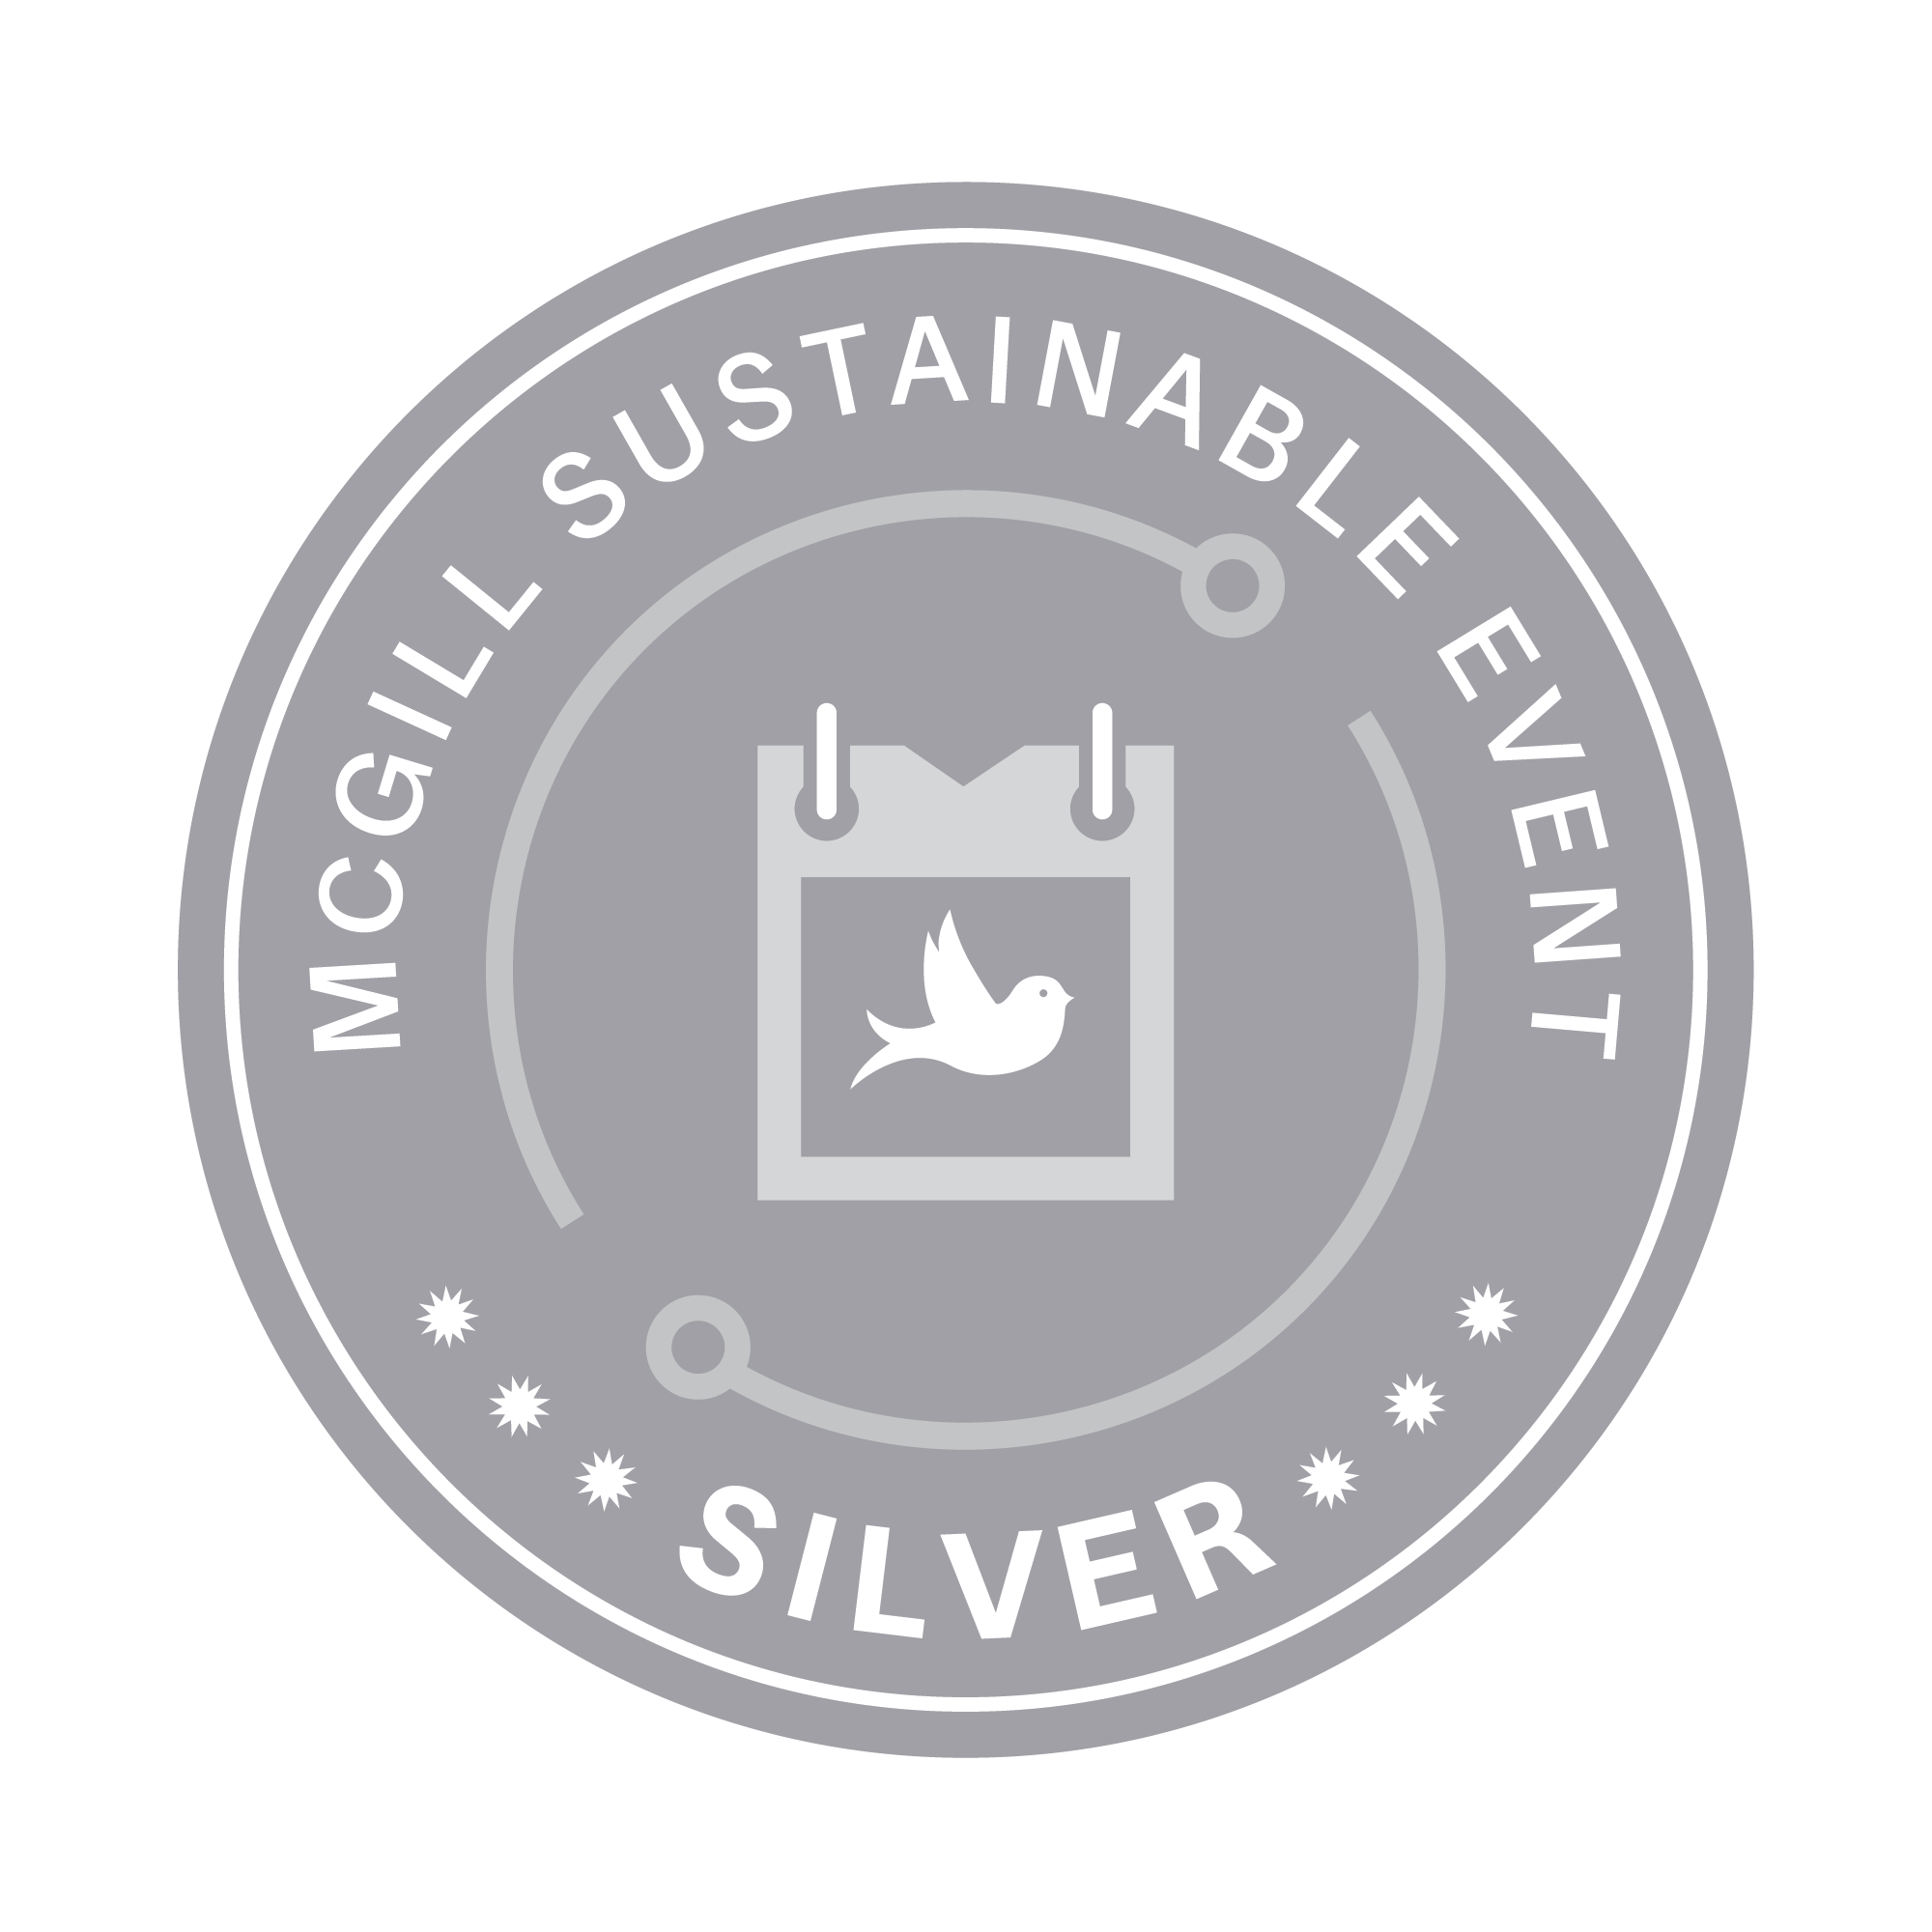 Silver Sustainable Event certificationl